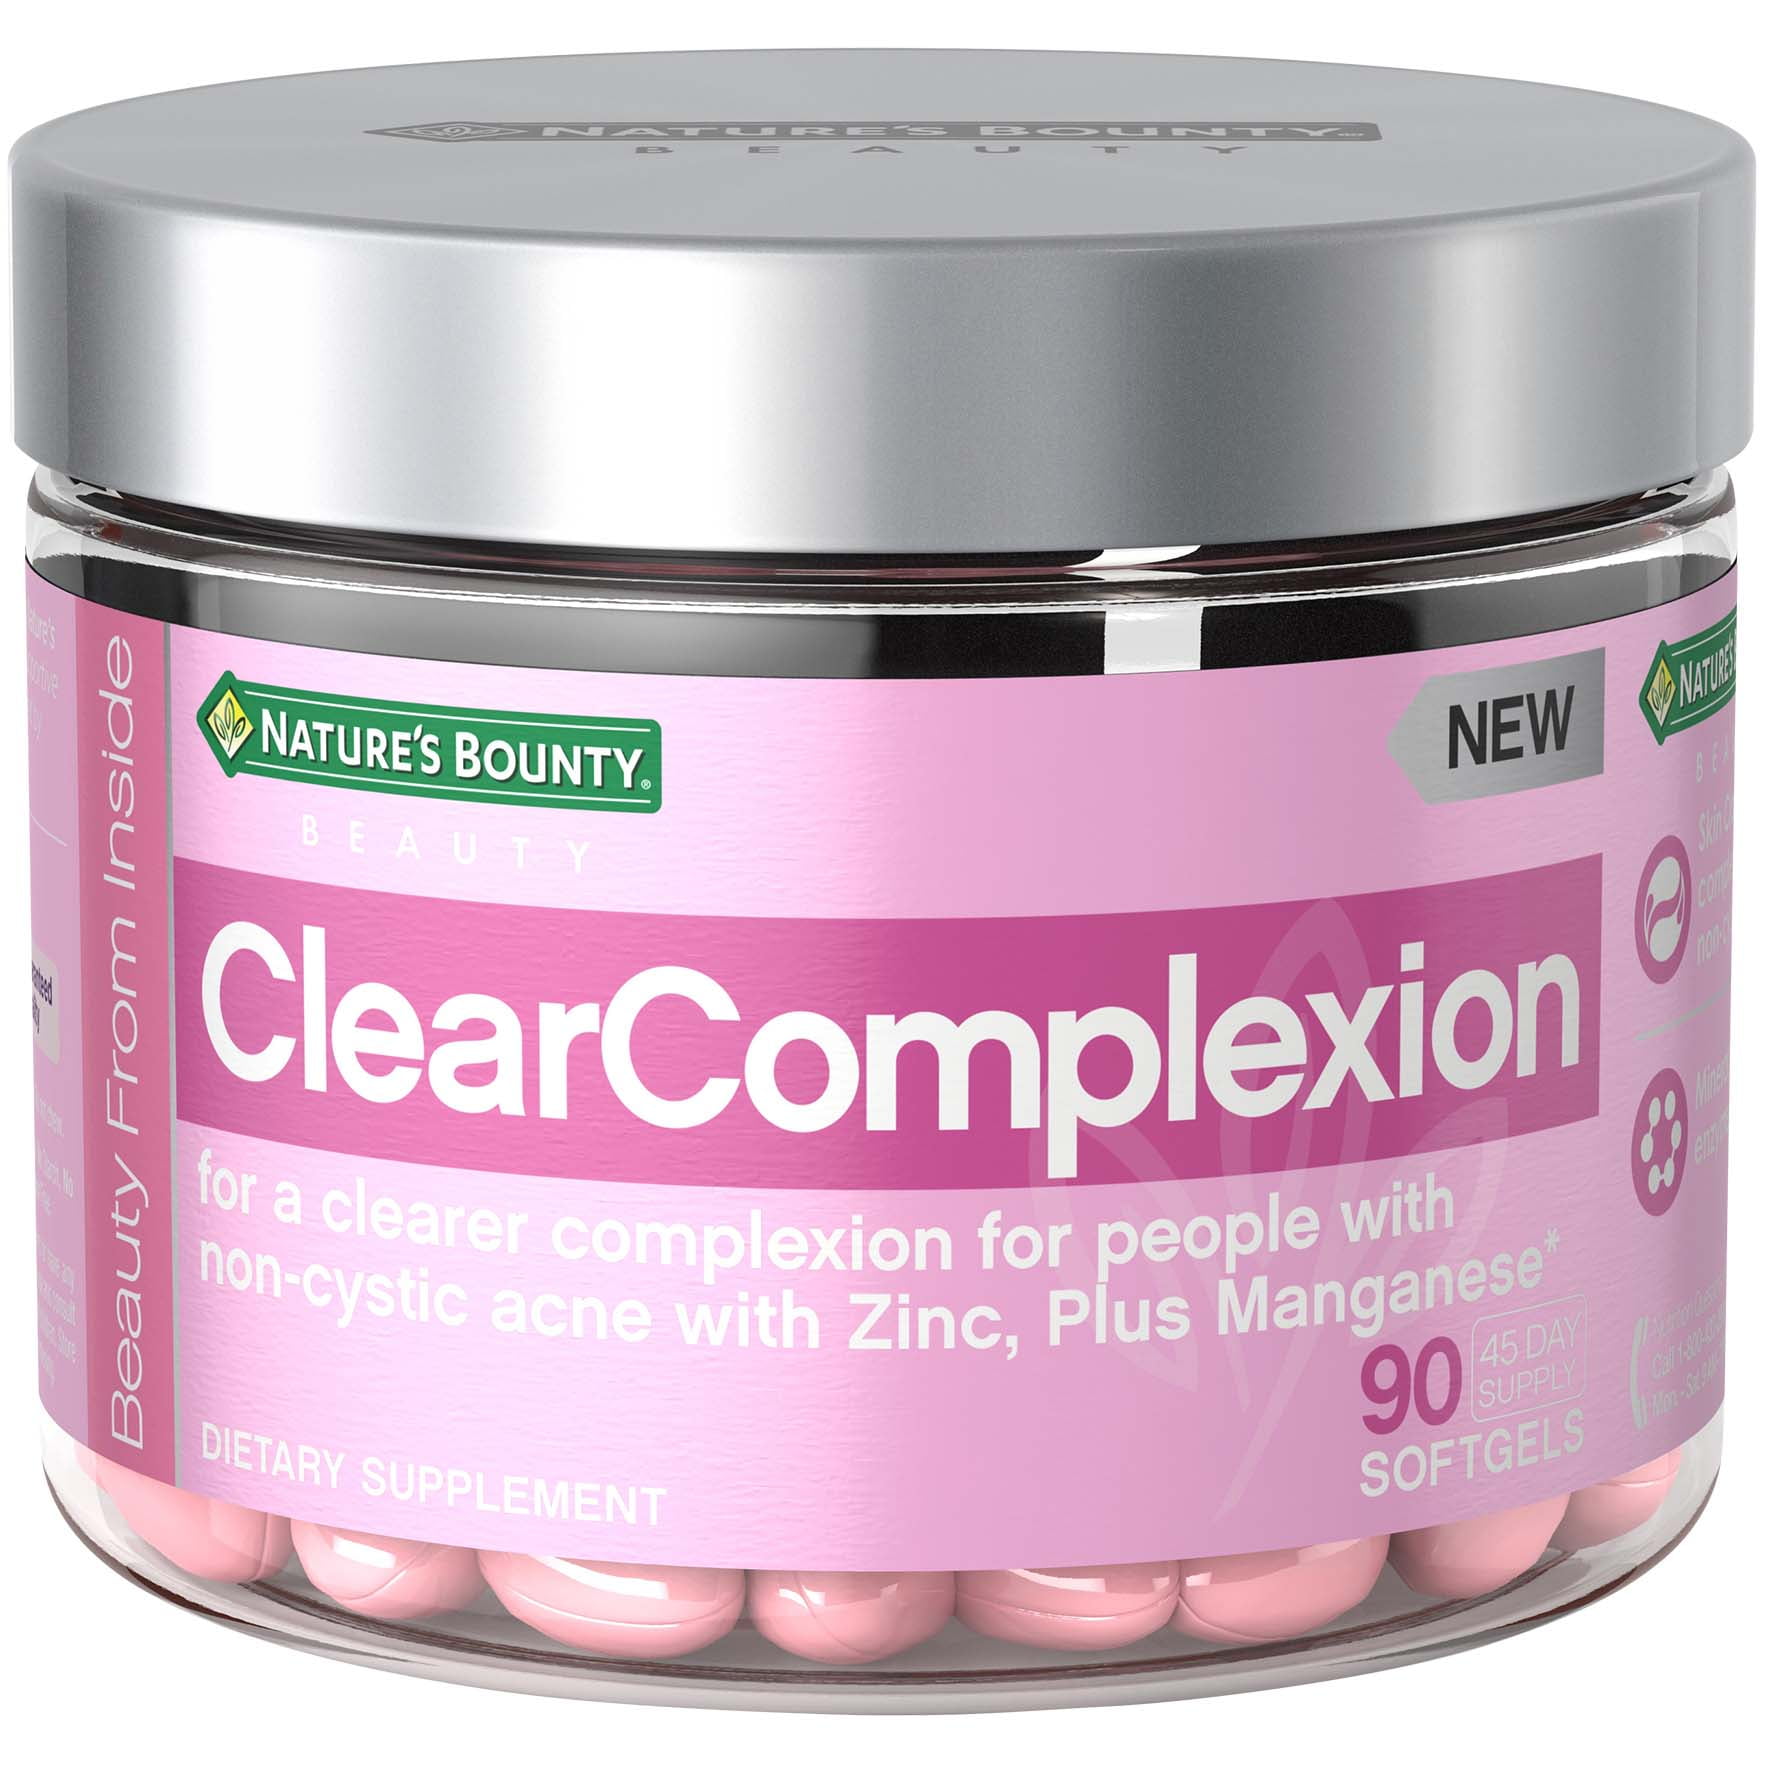 Nature's Bounty® ClearComplexion Dietary Supplement with Zinc